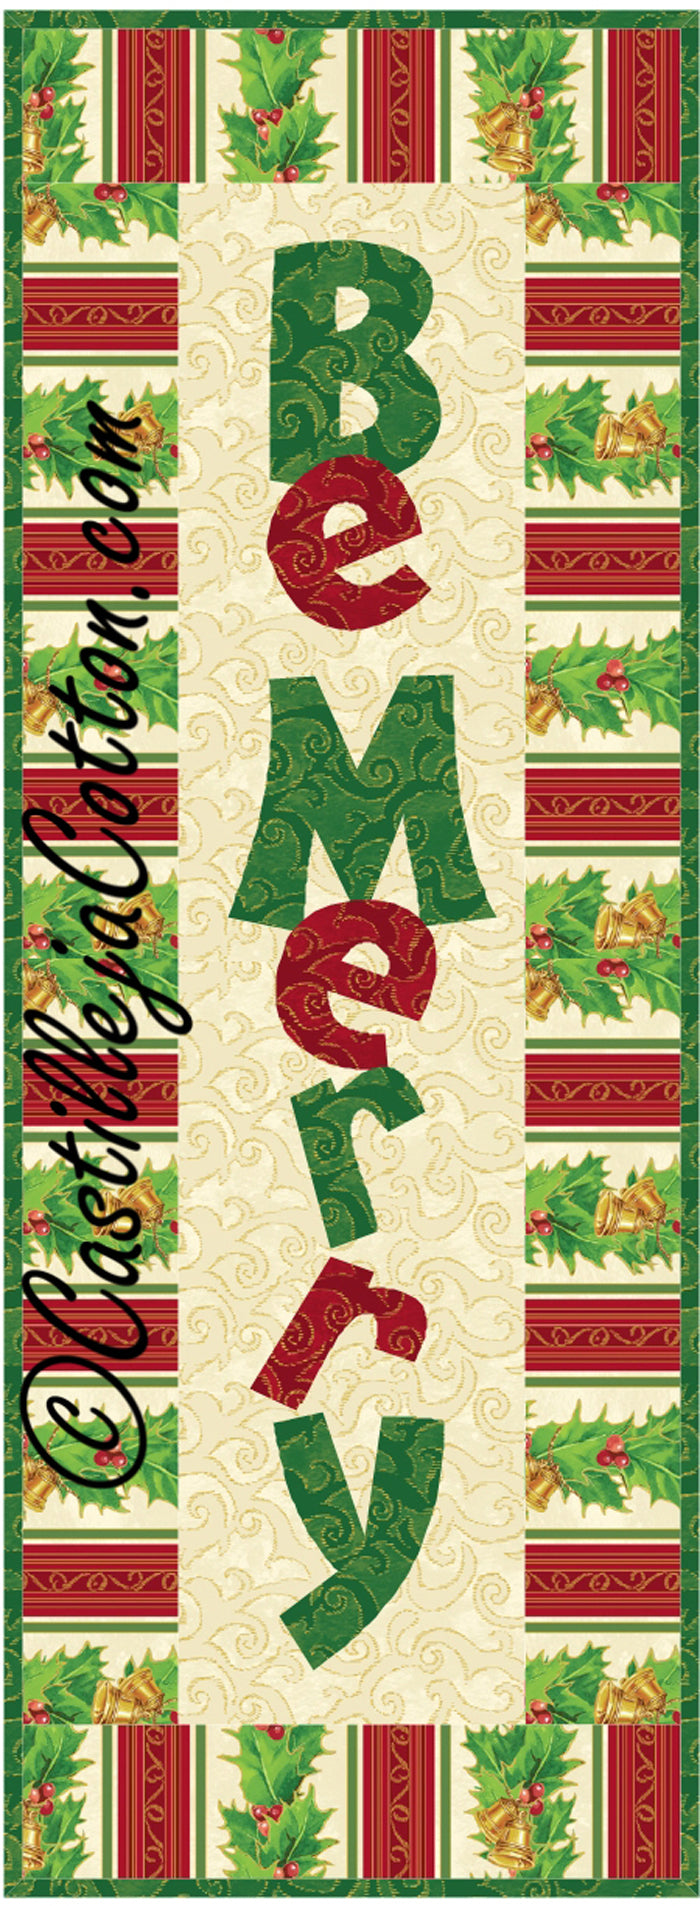 Be Merry Quilt Pattern CJC-48032 - Paper Pattern